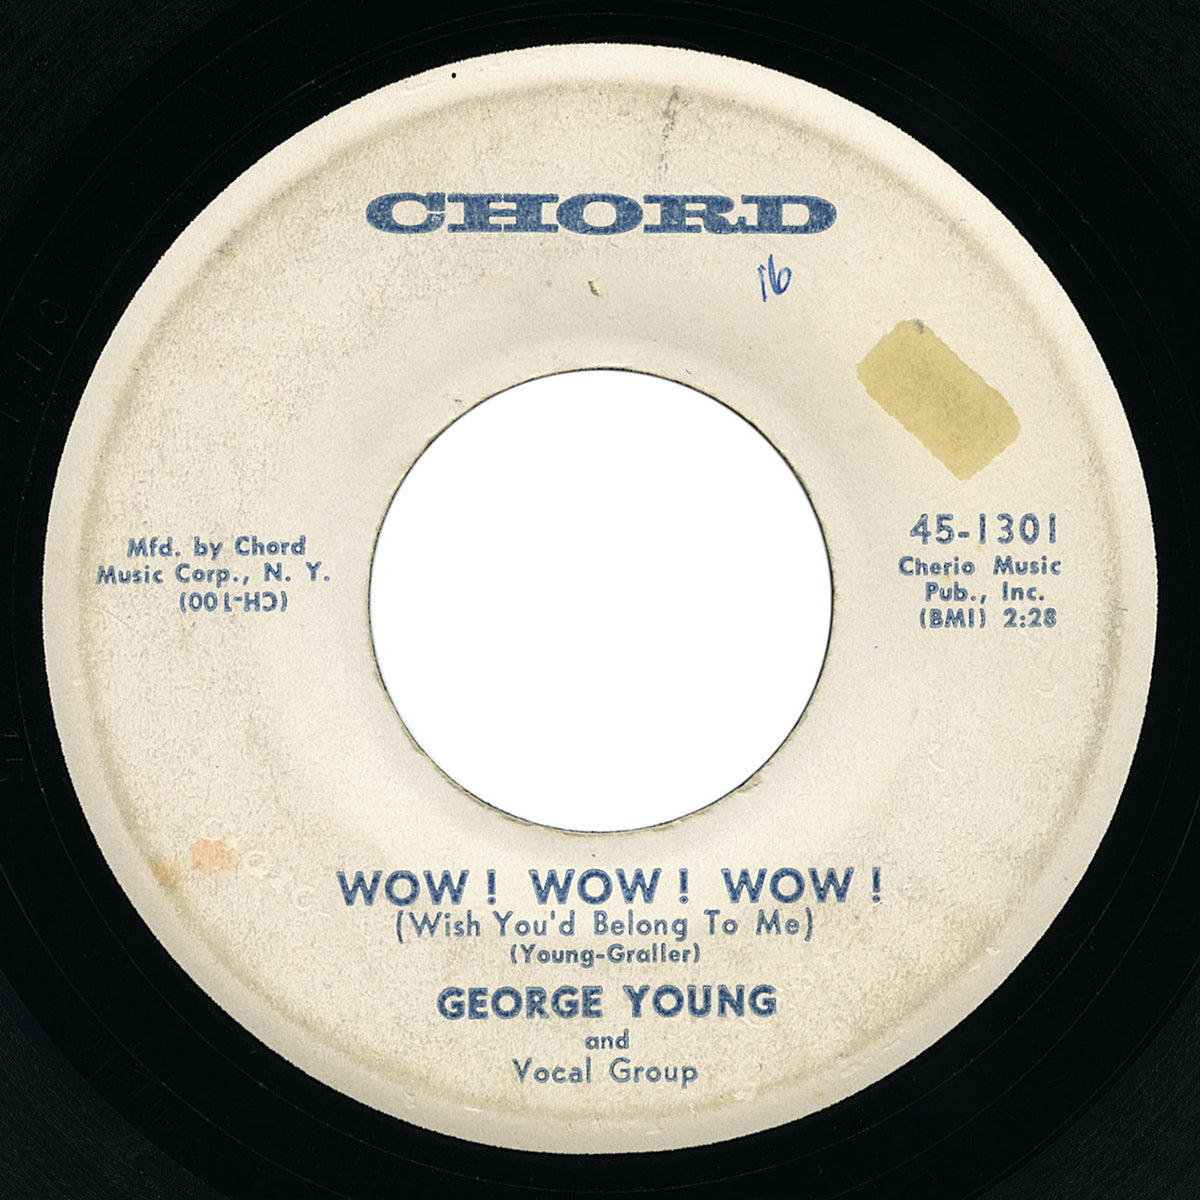 George Young – Wow! Wow! Wow! – Chord